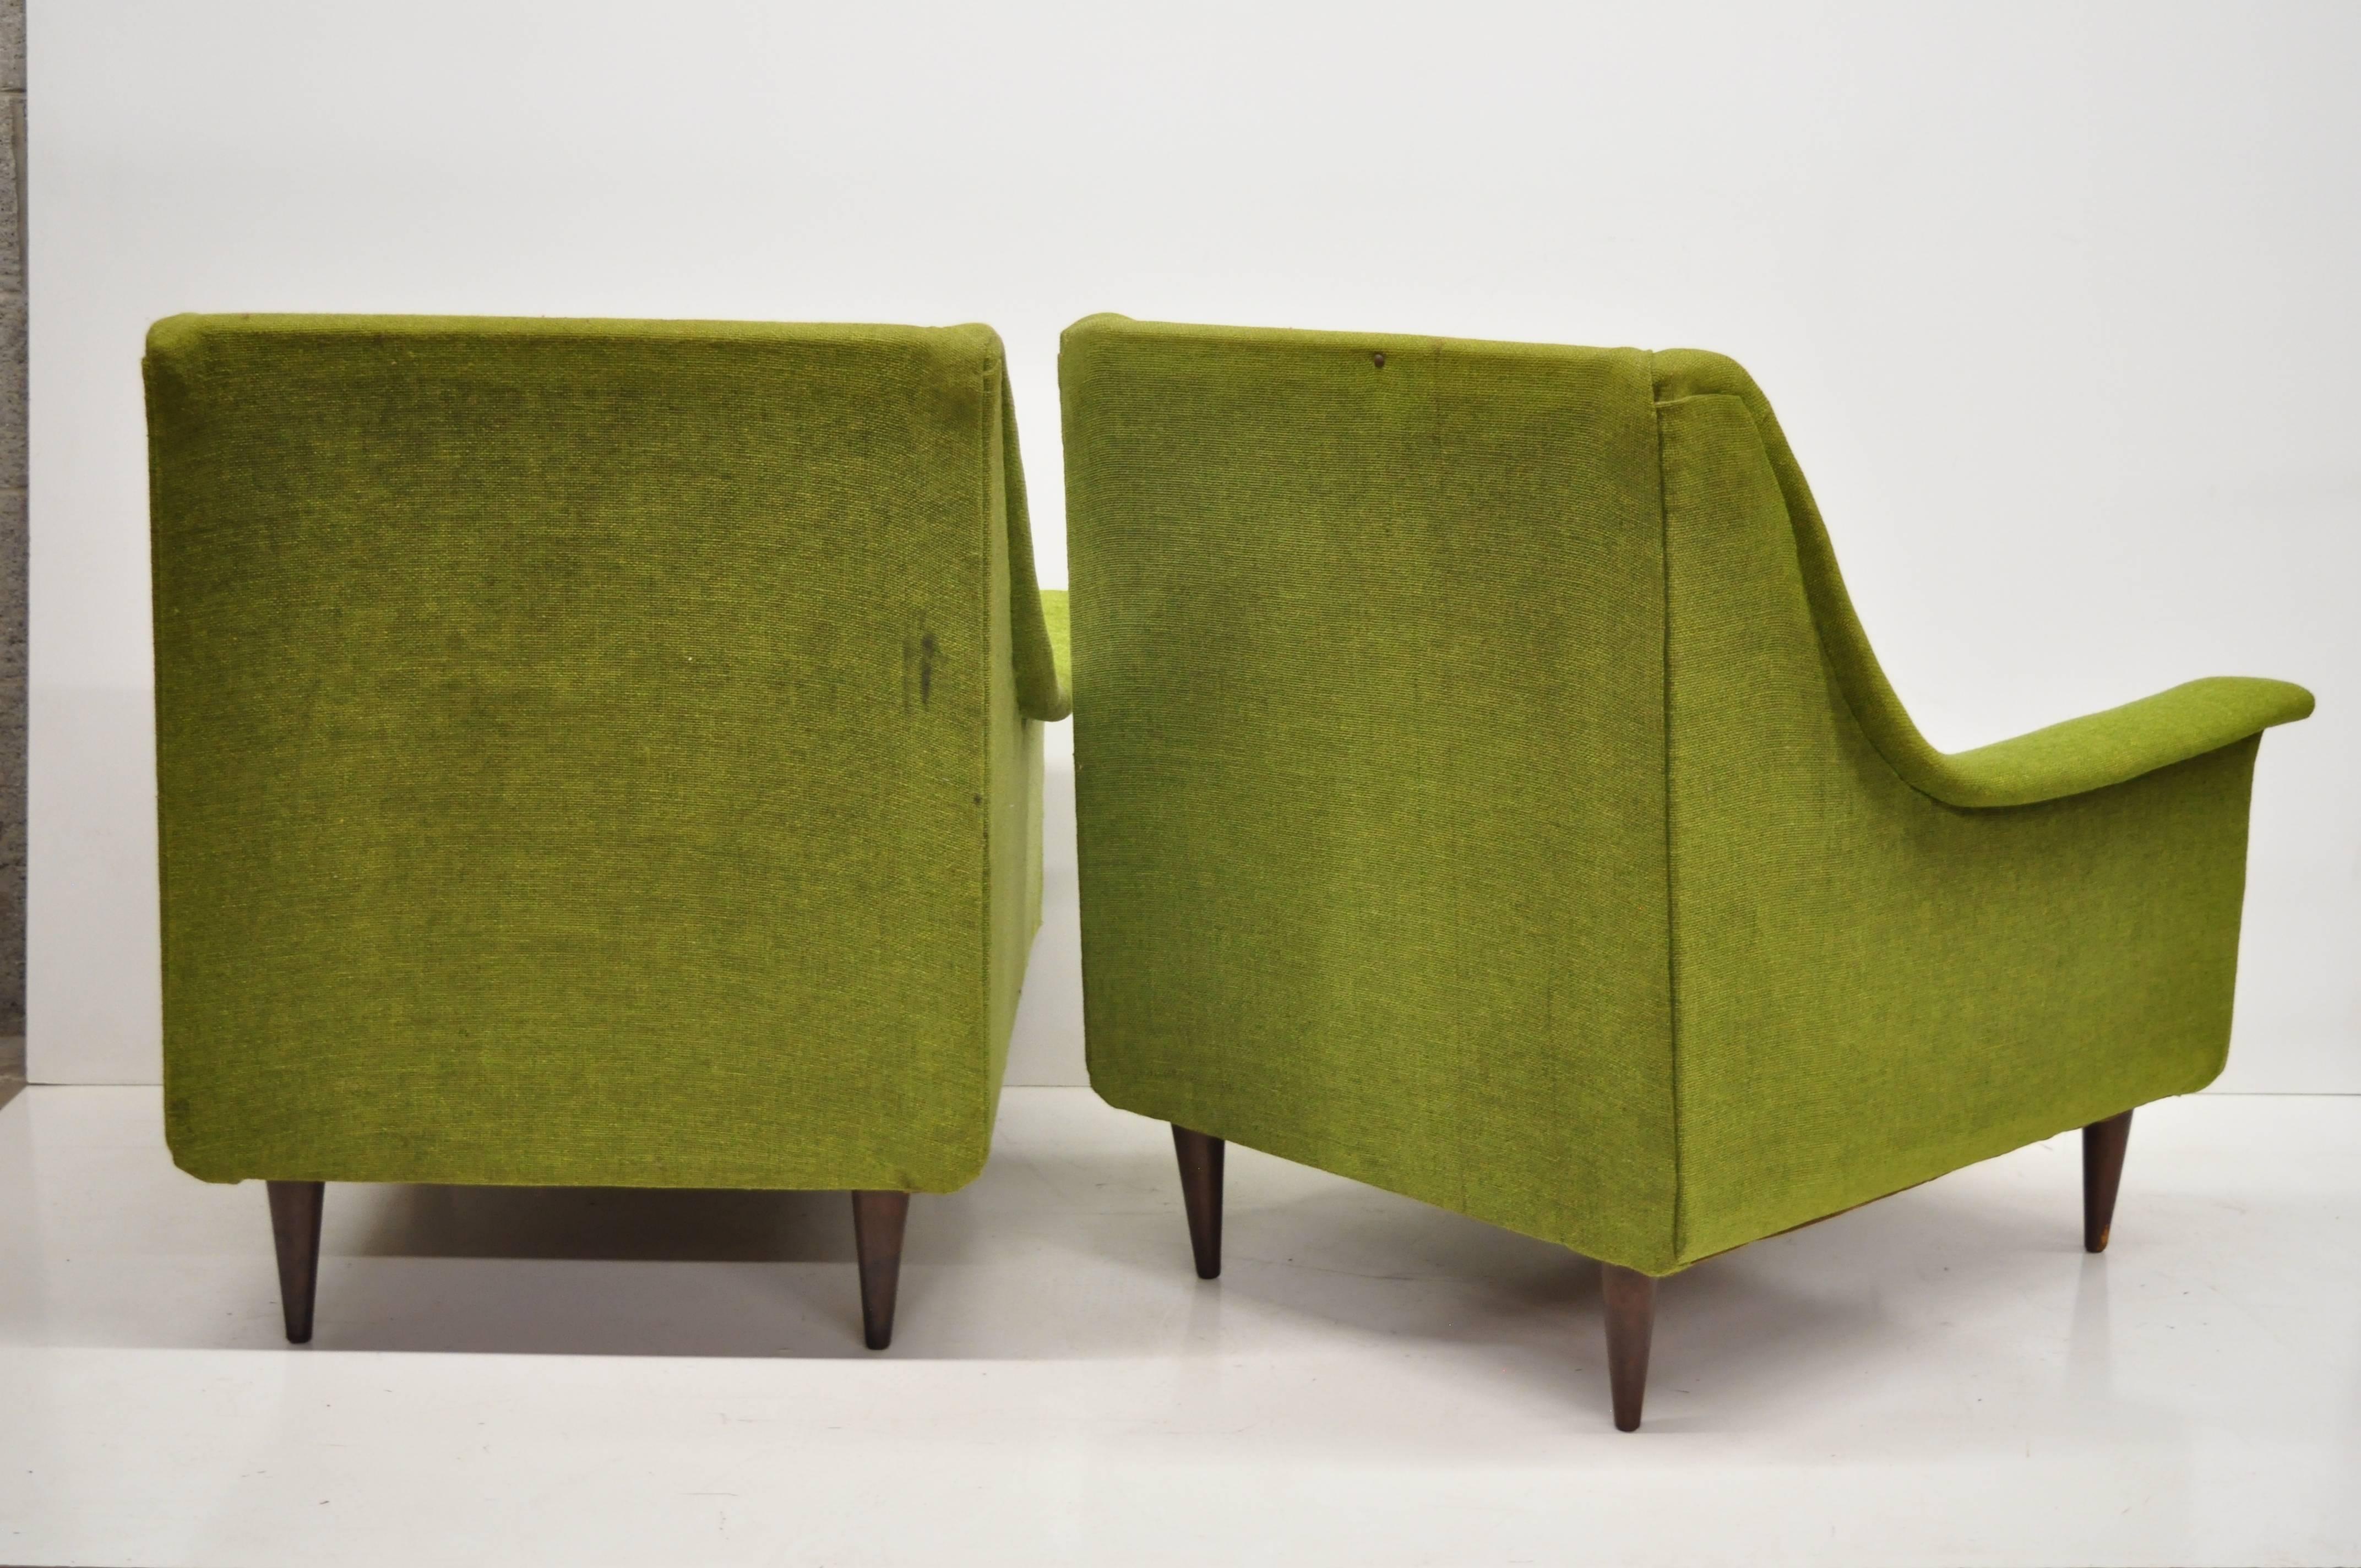 Pair of Kroehler Mid-Century Modern Sculptural Club Lounge Chairs after Pearsall 1